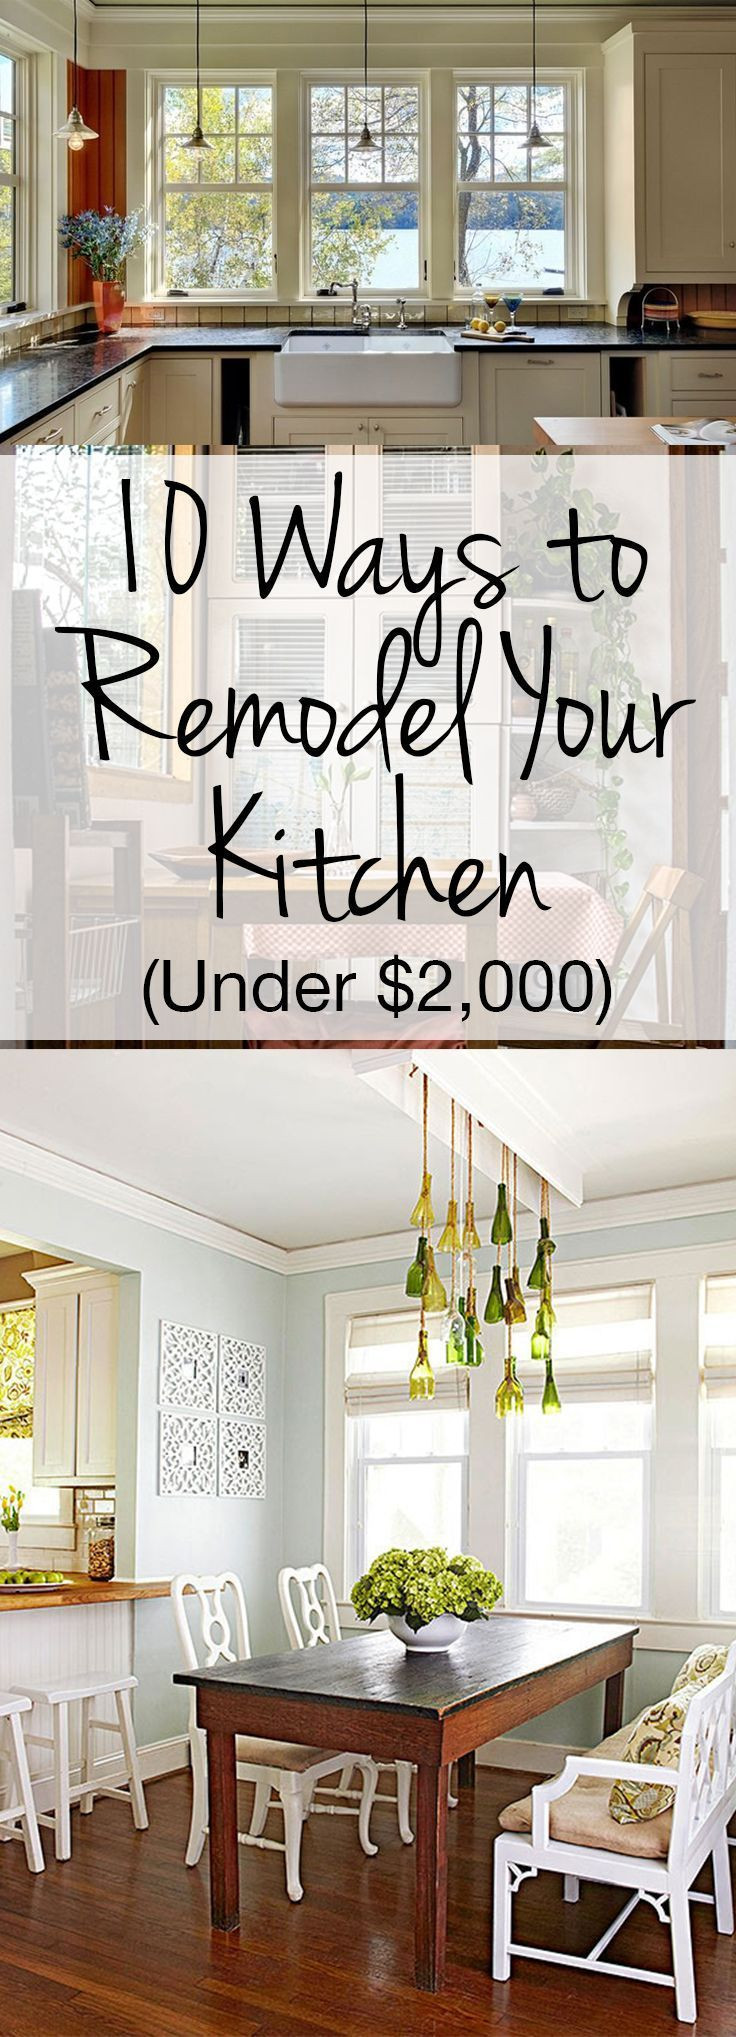 Cheapest Way To Remodel Kitchen
 10 Ways to Remodel Your Kitchen Under $2 000